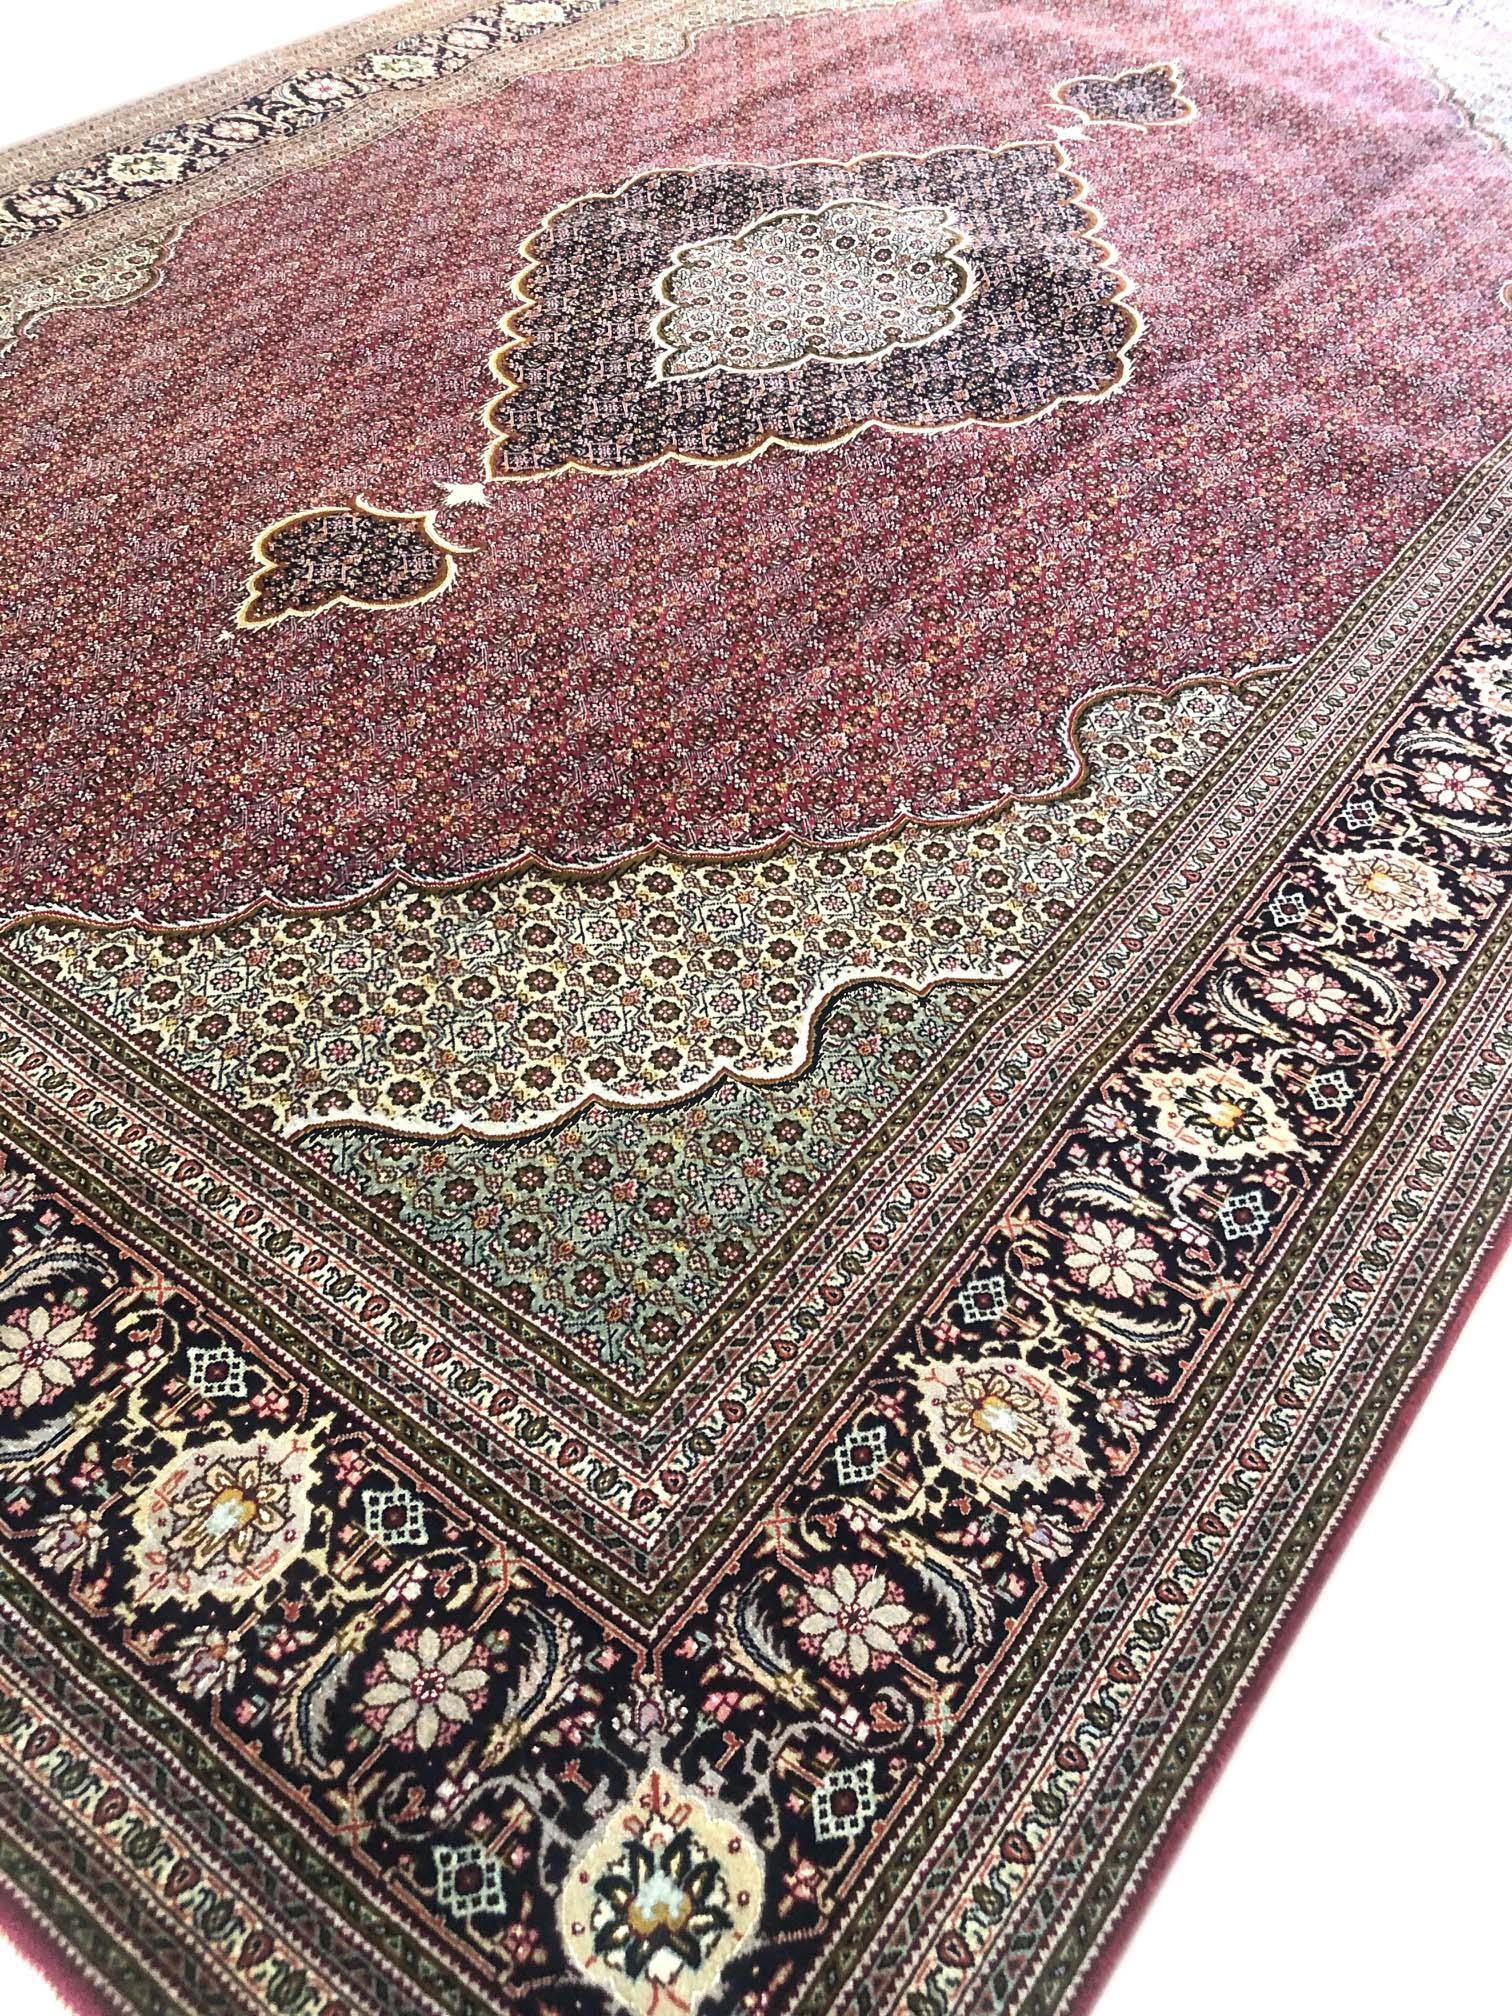 Tabriz rugs are well known for their excellent weaving and design. One of the very famous patterns of Tabriz rugs are Fish Design known is Mahi. This beautiful piece has wool and silk pile with cotton foundation. The base color is burgundy and the